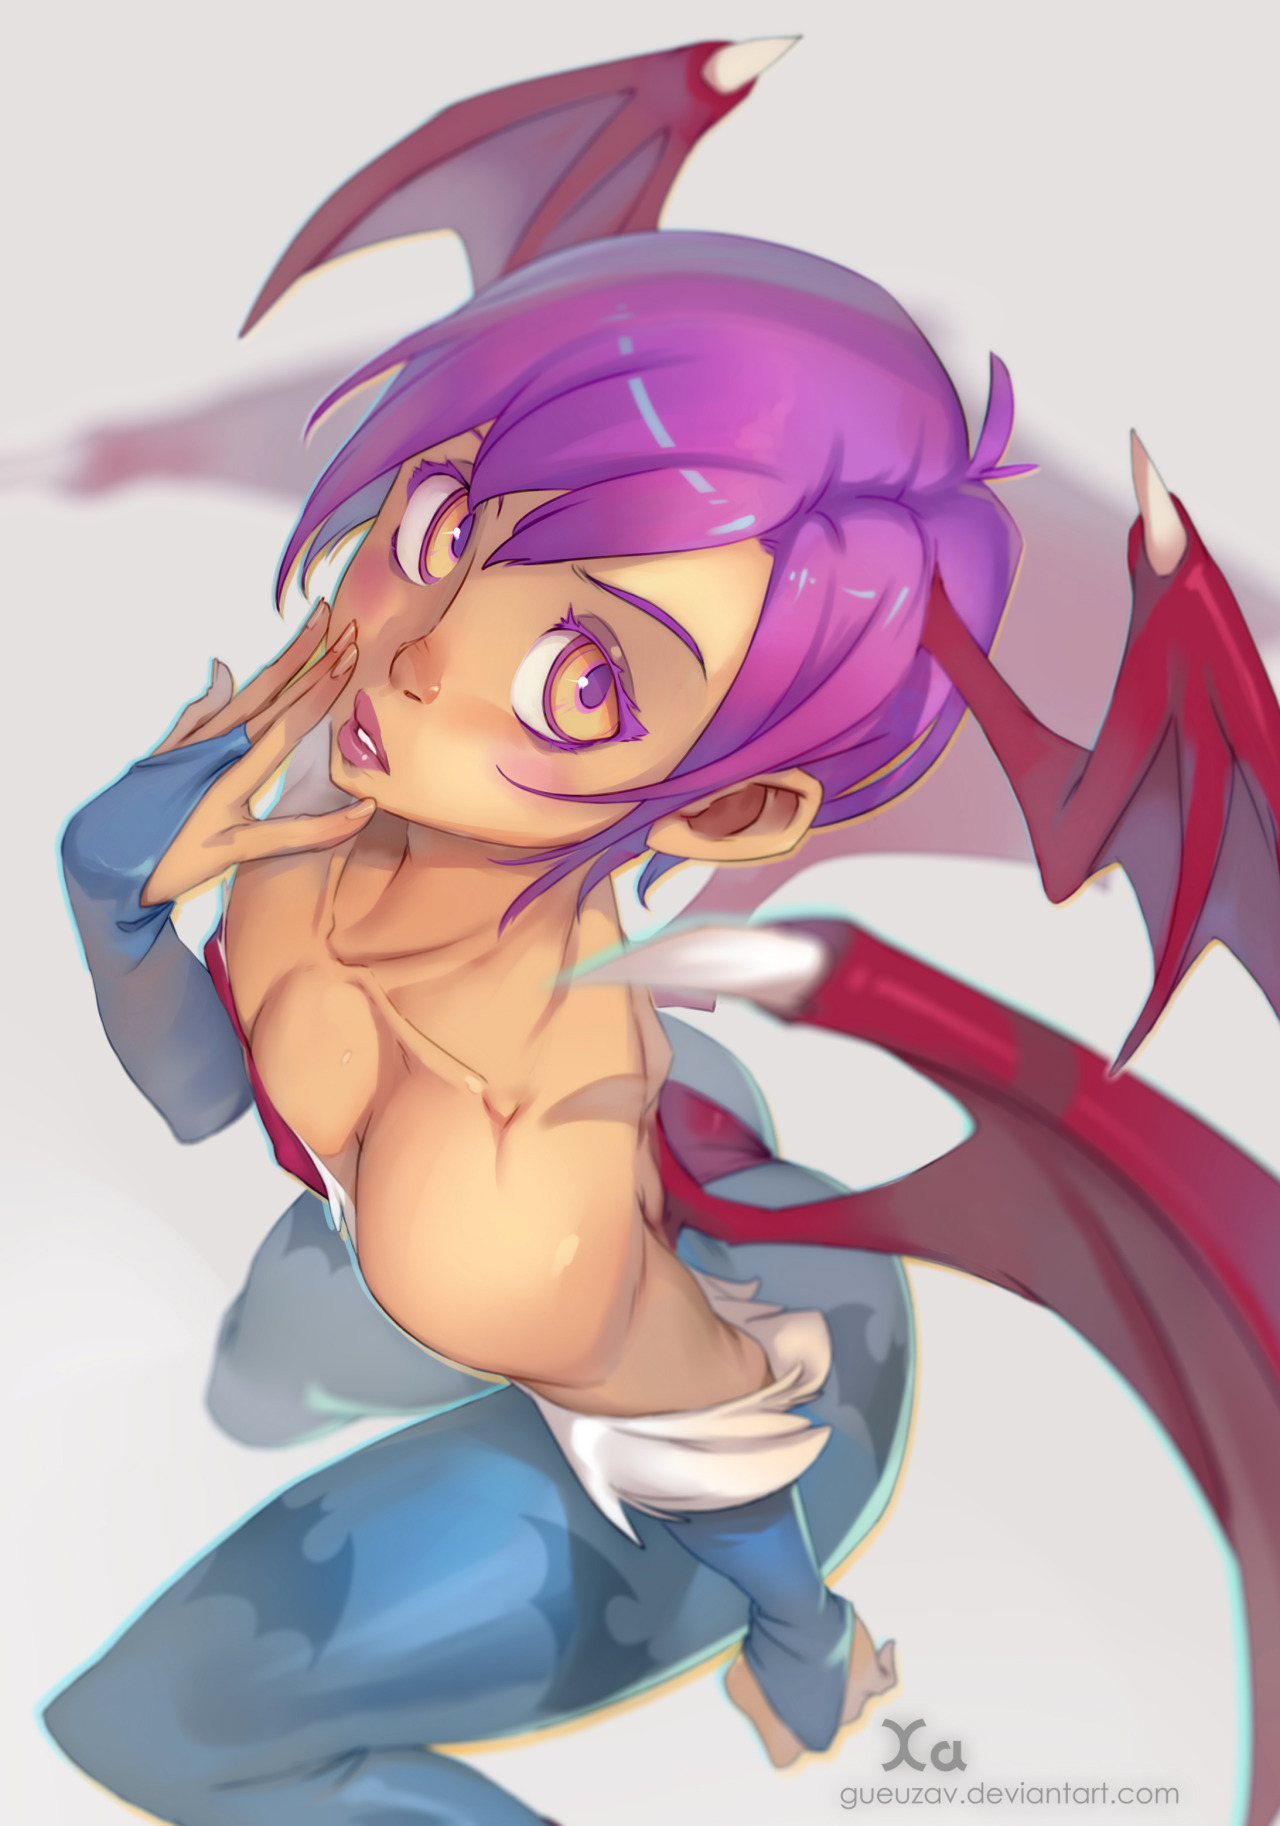 xa-colors: Lilith from Darkstalkers Made with Paint tool Saï   My youtube Channel 